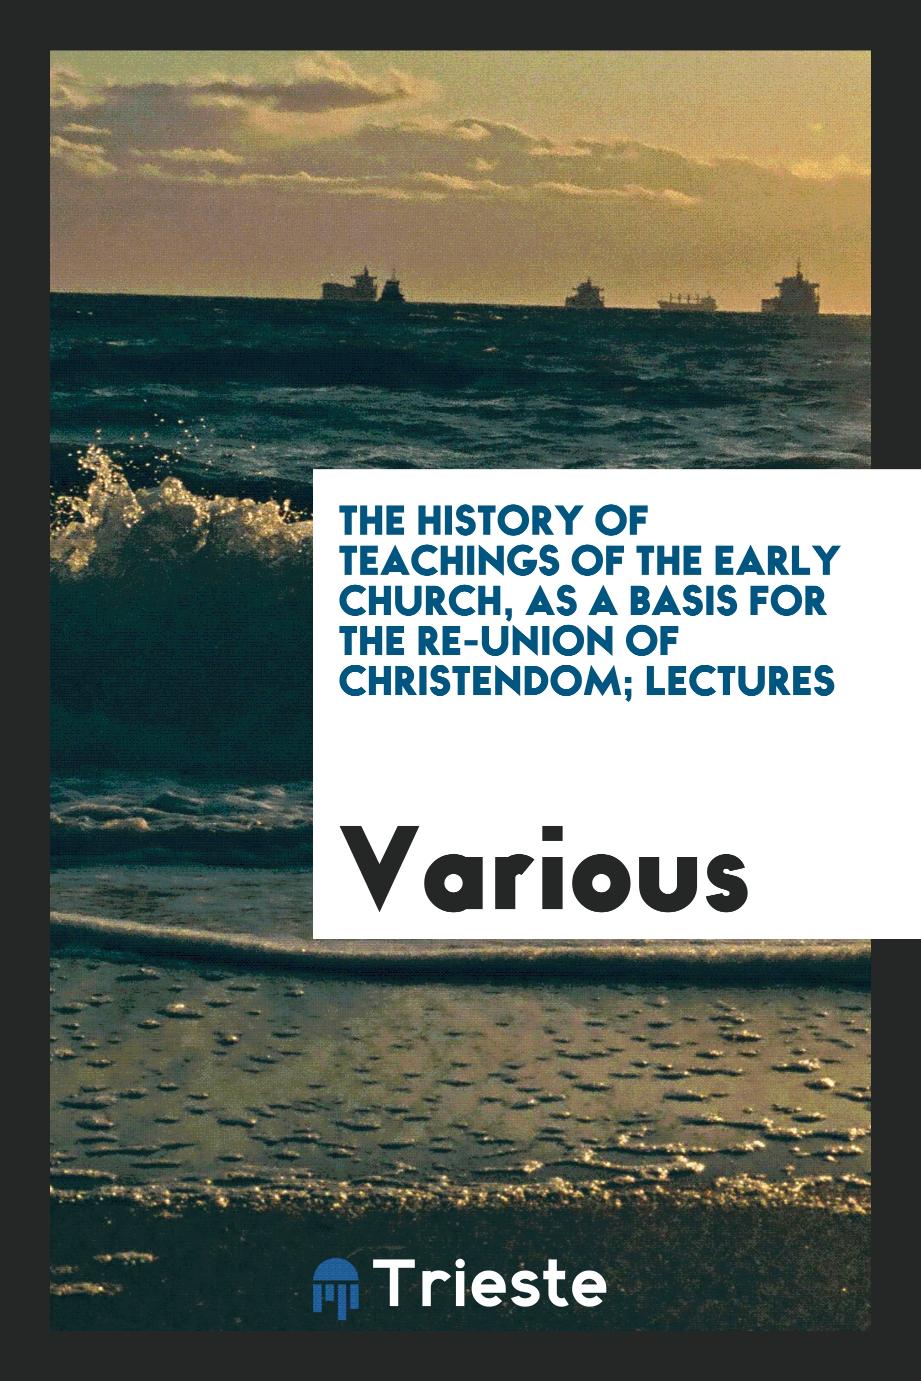 The History of teachings of the early Church, as a basis for the re-union of Christendom; lectures